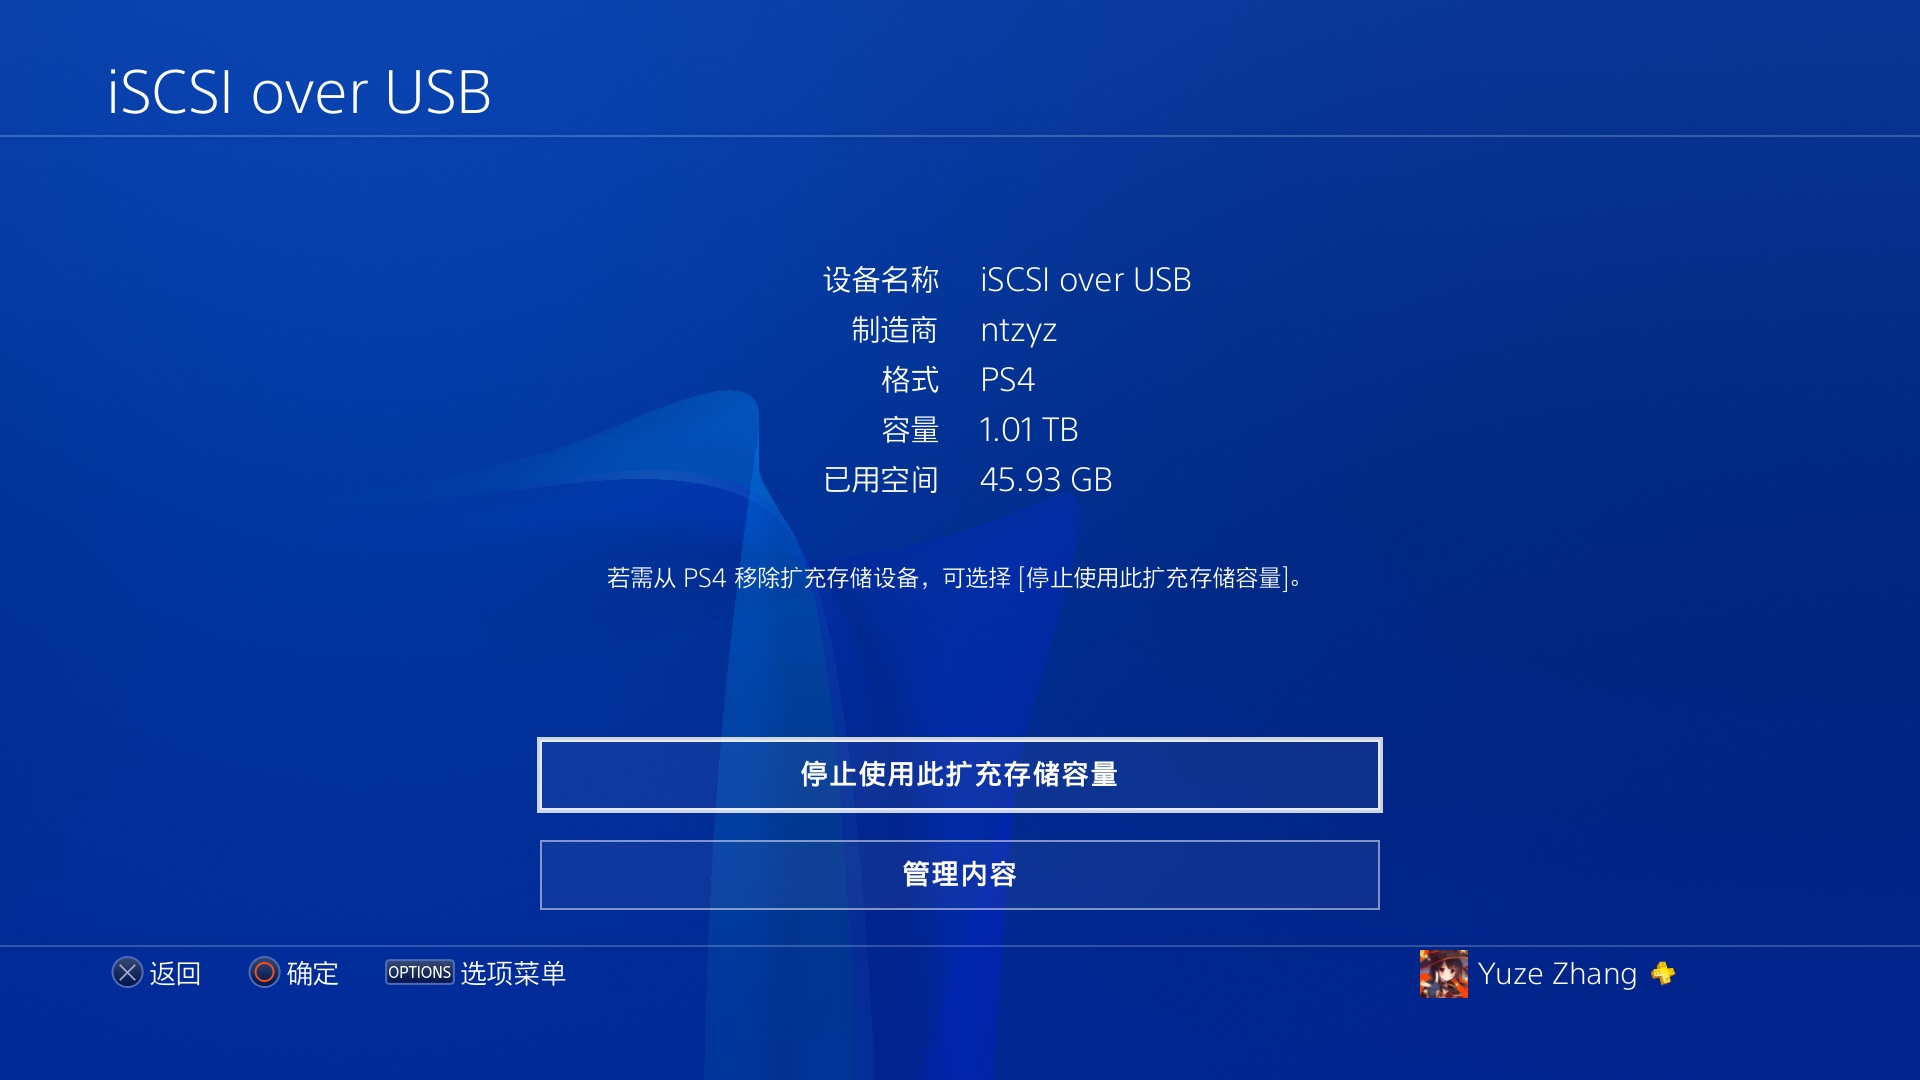 Extend Storage with iSCSI and USB Gadget for Your PS4